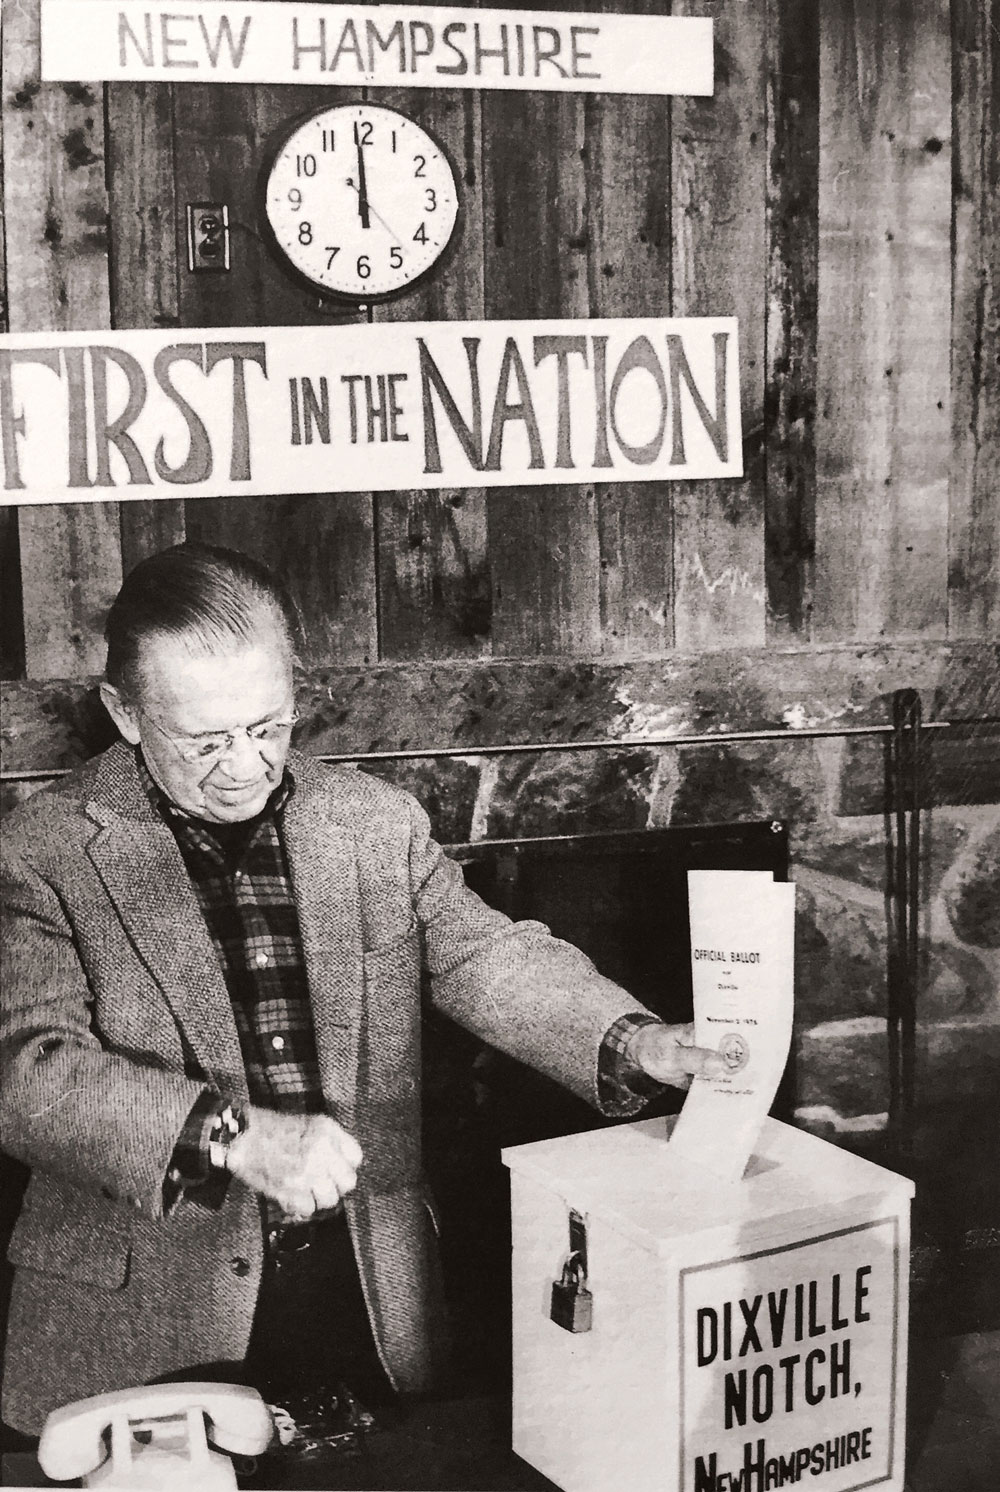 Although it wasn’t the first New Hampshire community to conduct midnight voting, Dixville Notch became the most famous for it. The man behind it was Neil Tillotson, rubber magnate and owner of The Balsams resort. As he did over the course of 11 presidential cycles, Tillotson, pictured here in 1976, cast the unincorporated area’s first vote. 